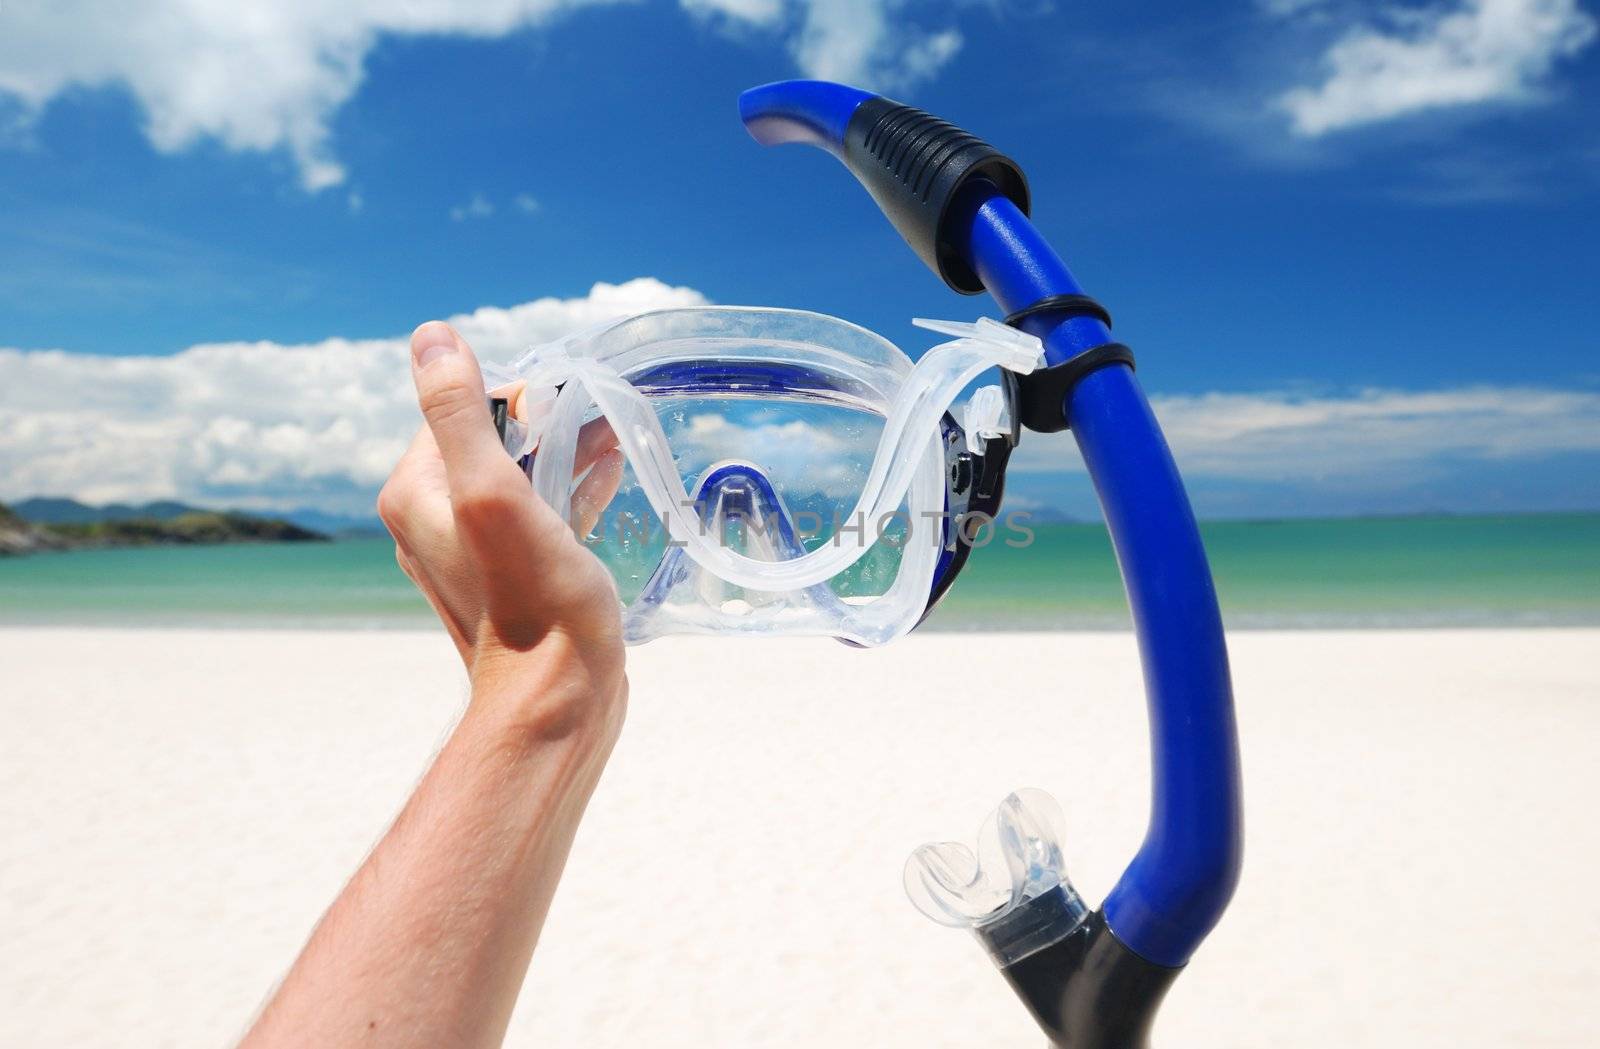 Snorkel equipment against beach and sky